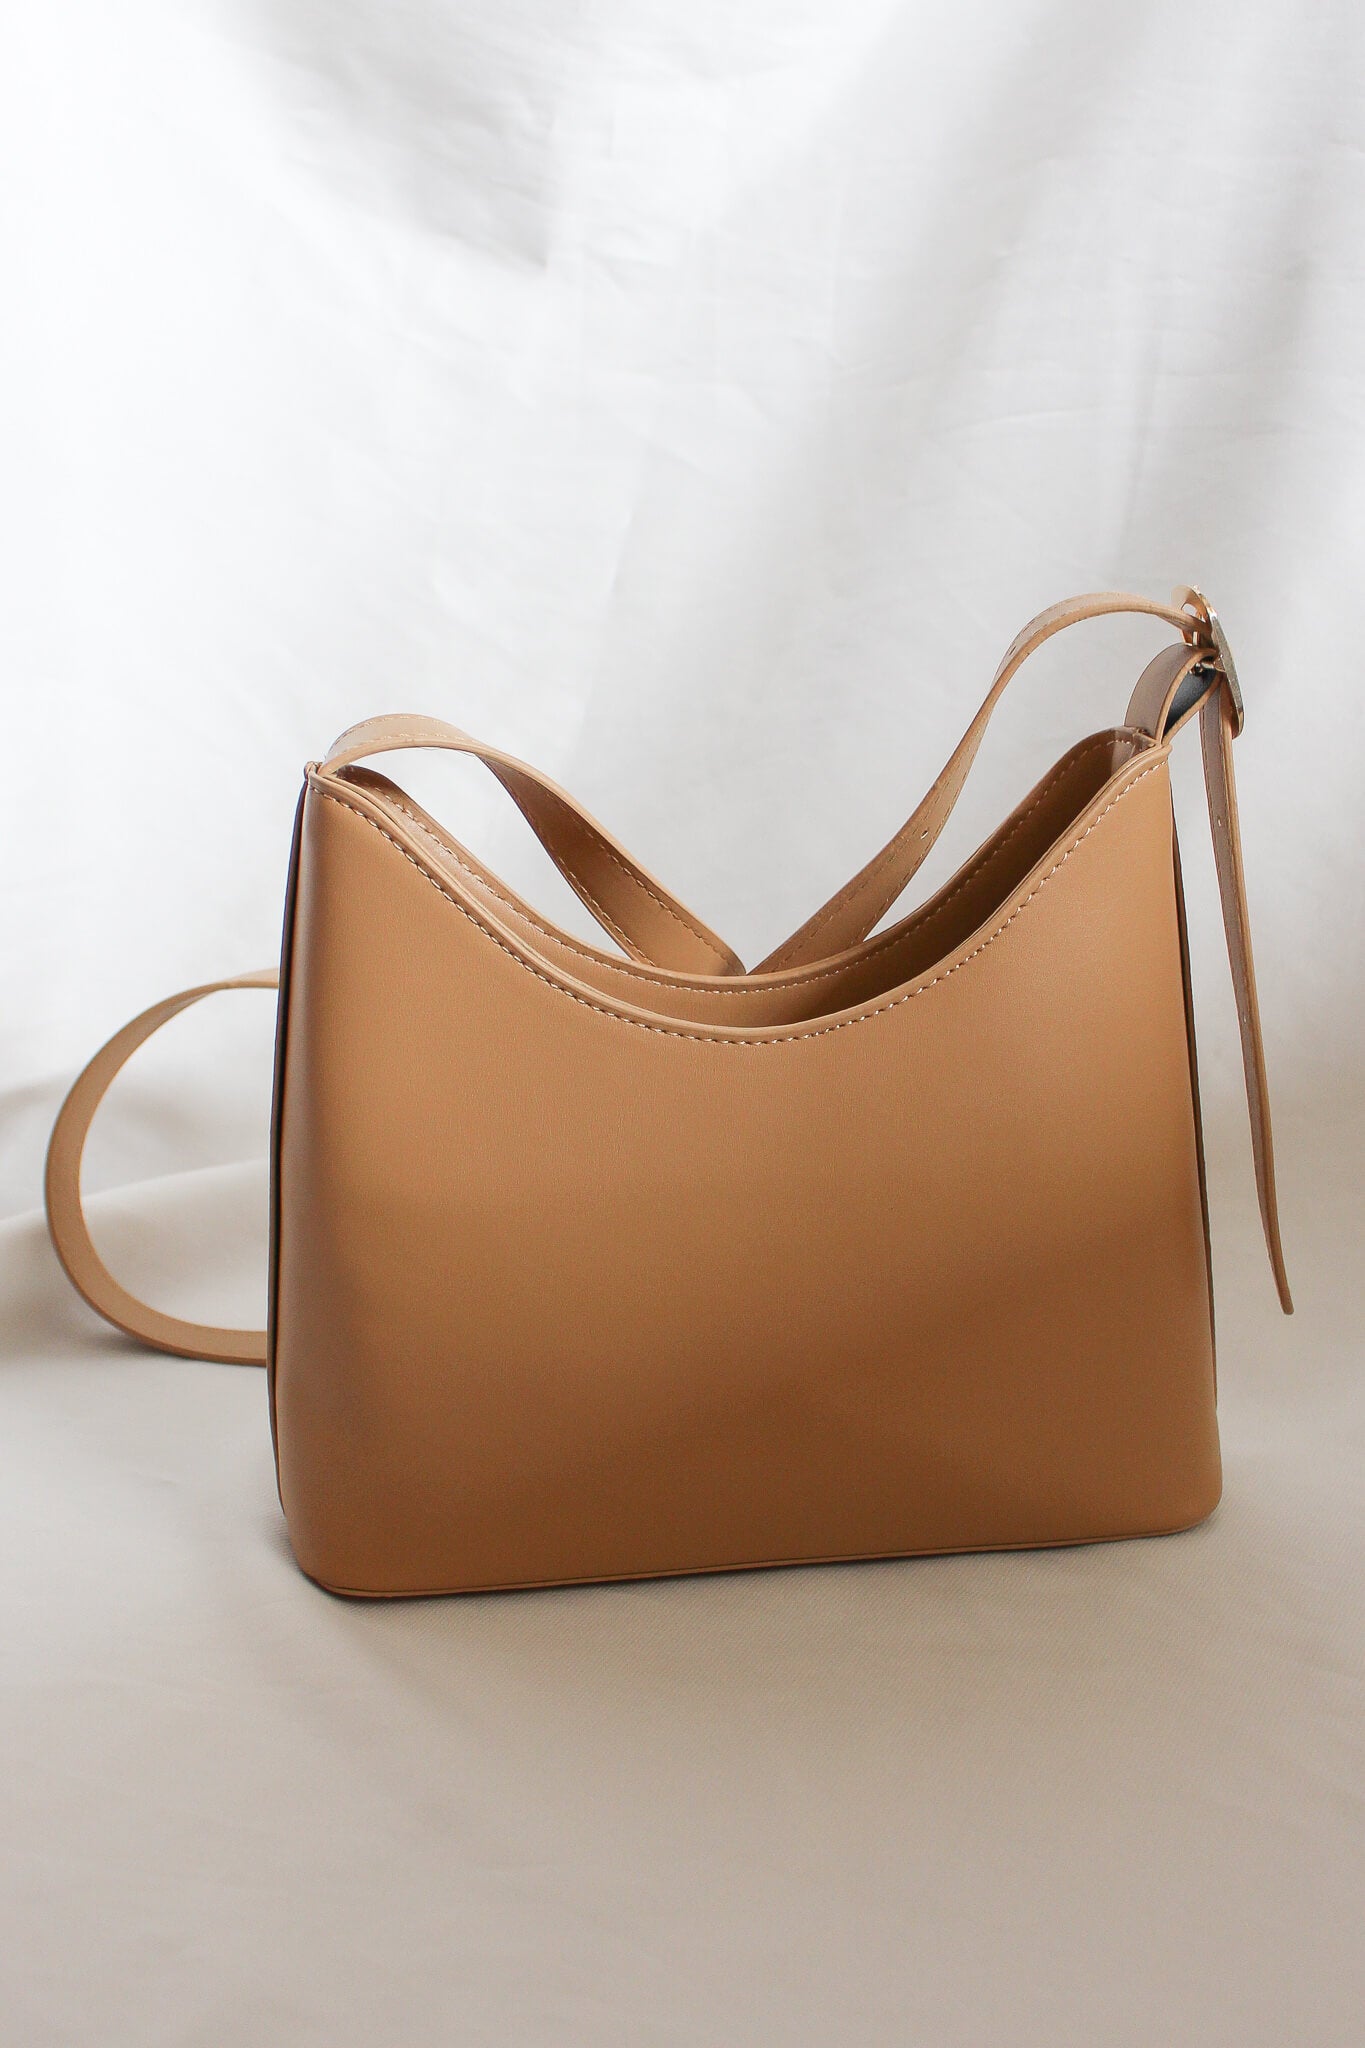 Small and simple shoulder carry bag with adjustable straps